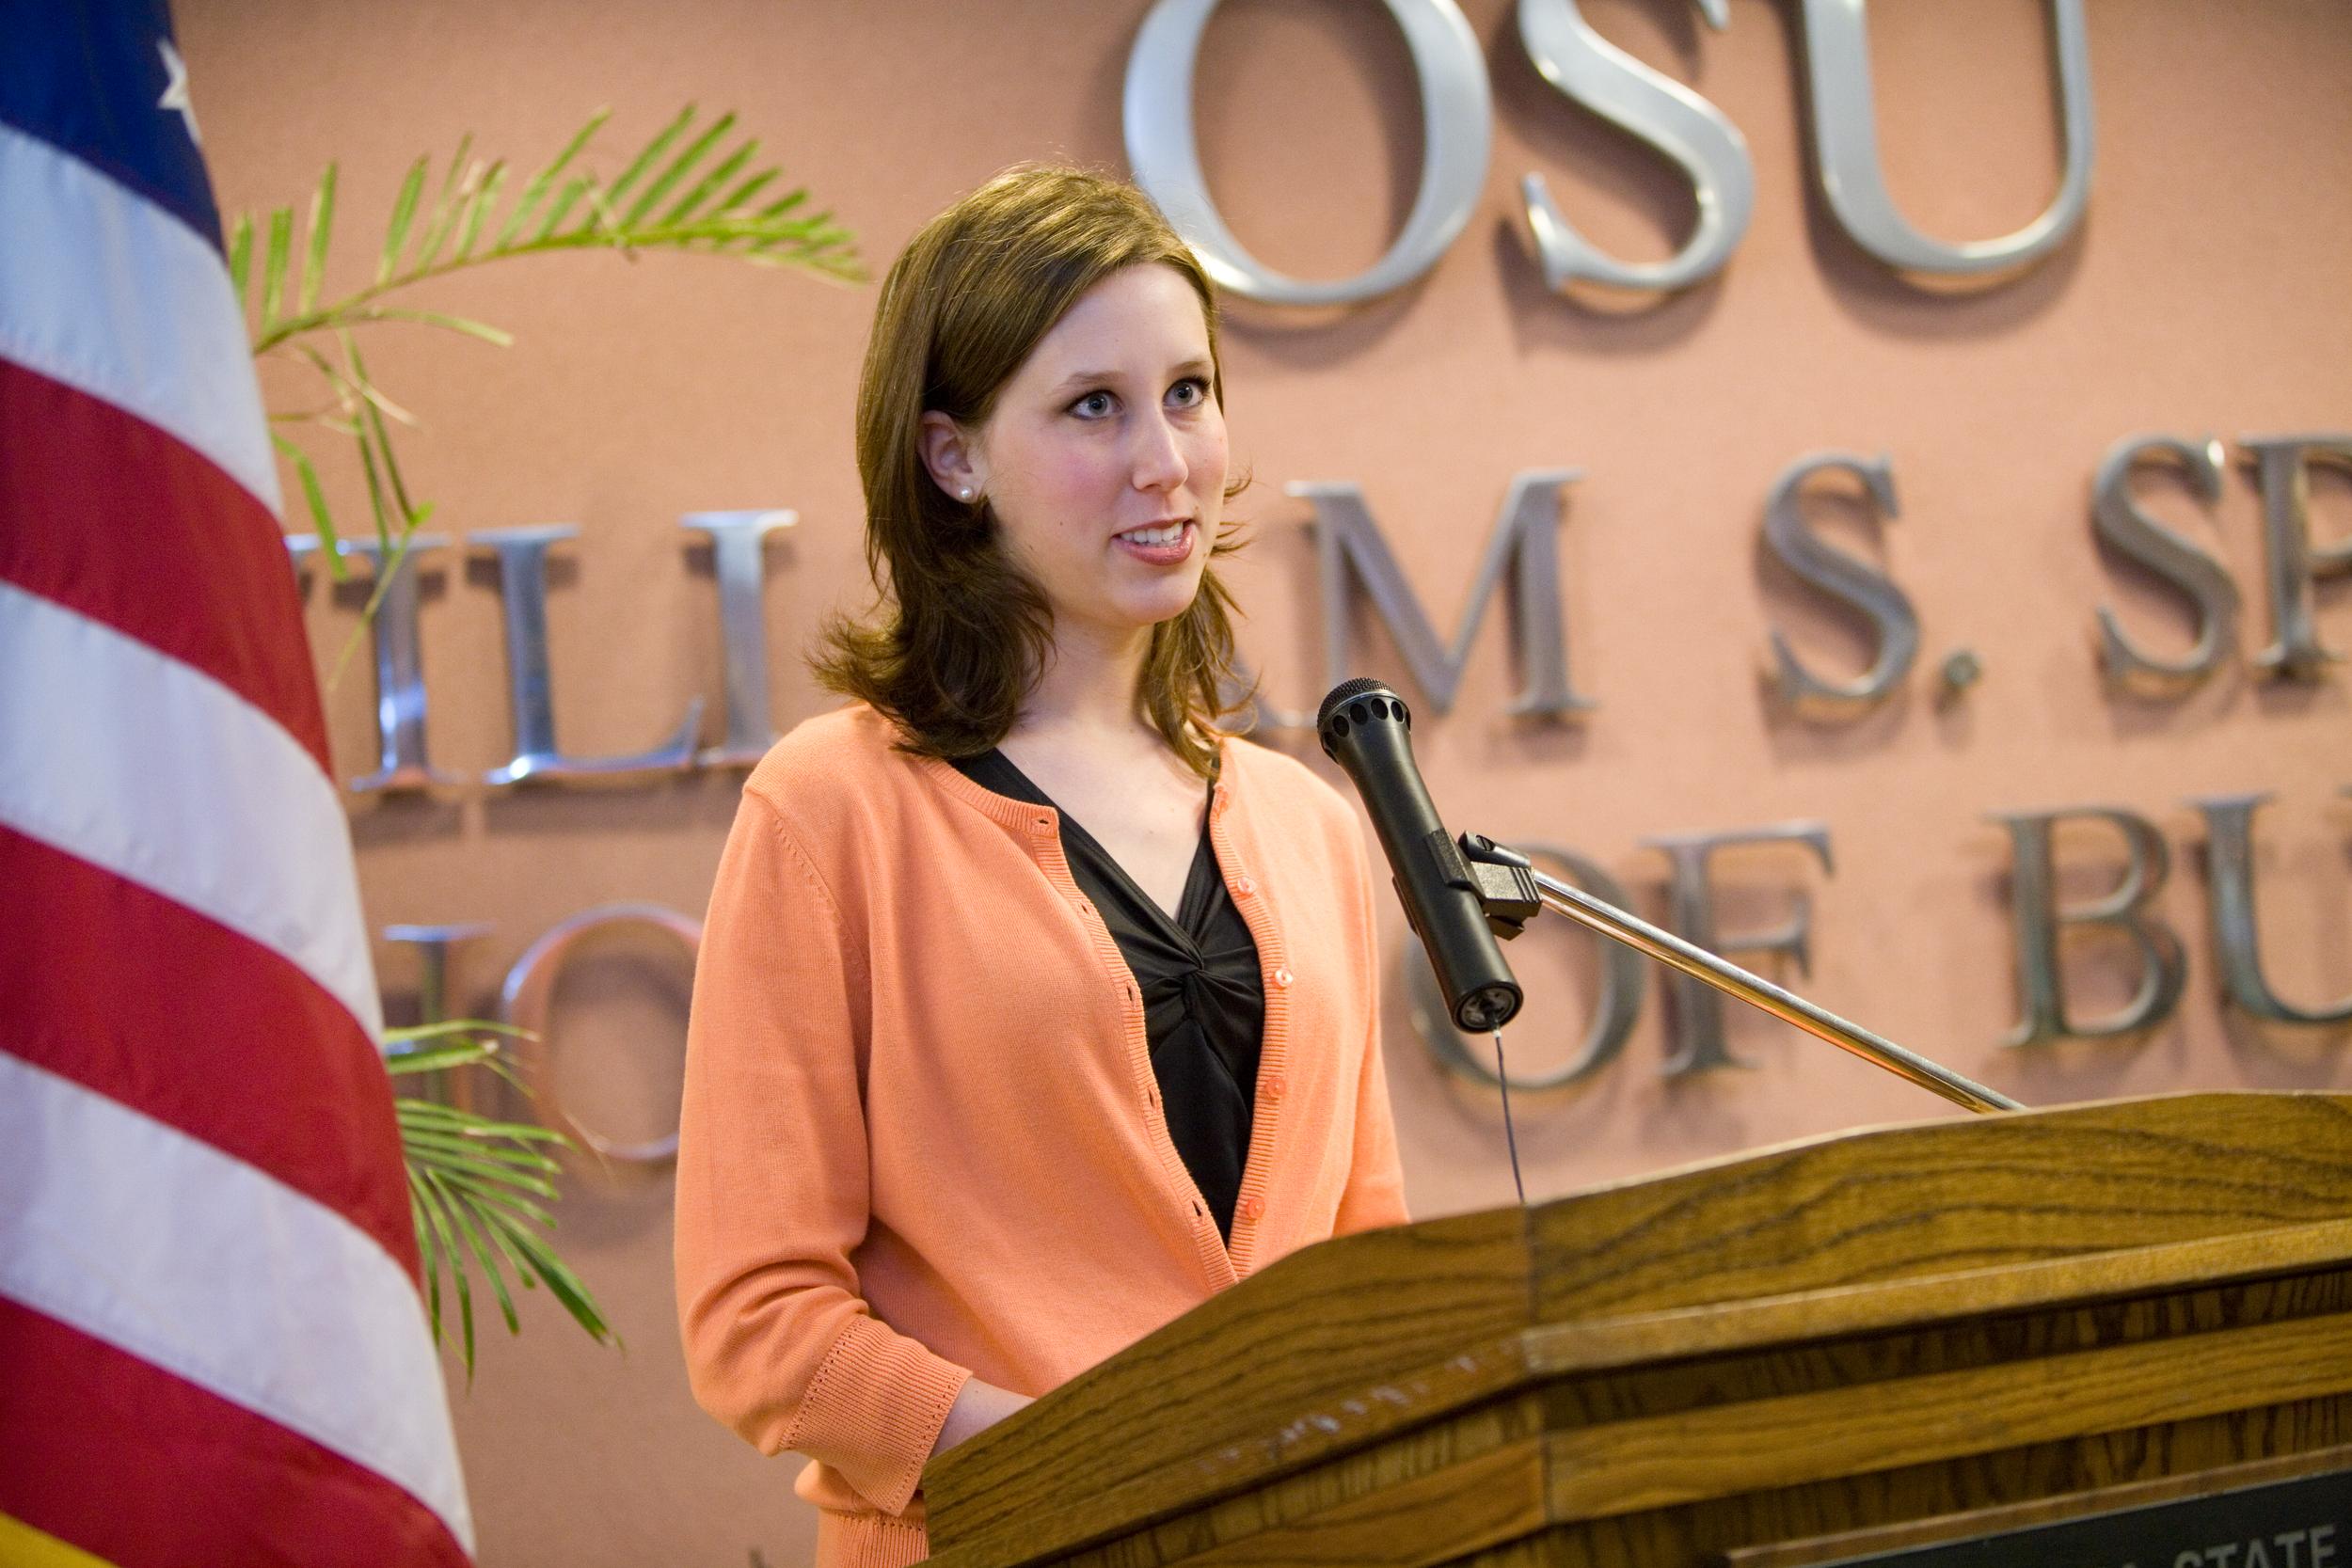 A young white woman stands at a lectern with a microphone at an event